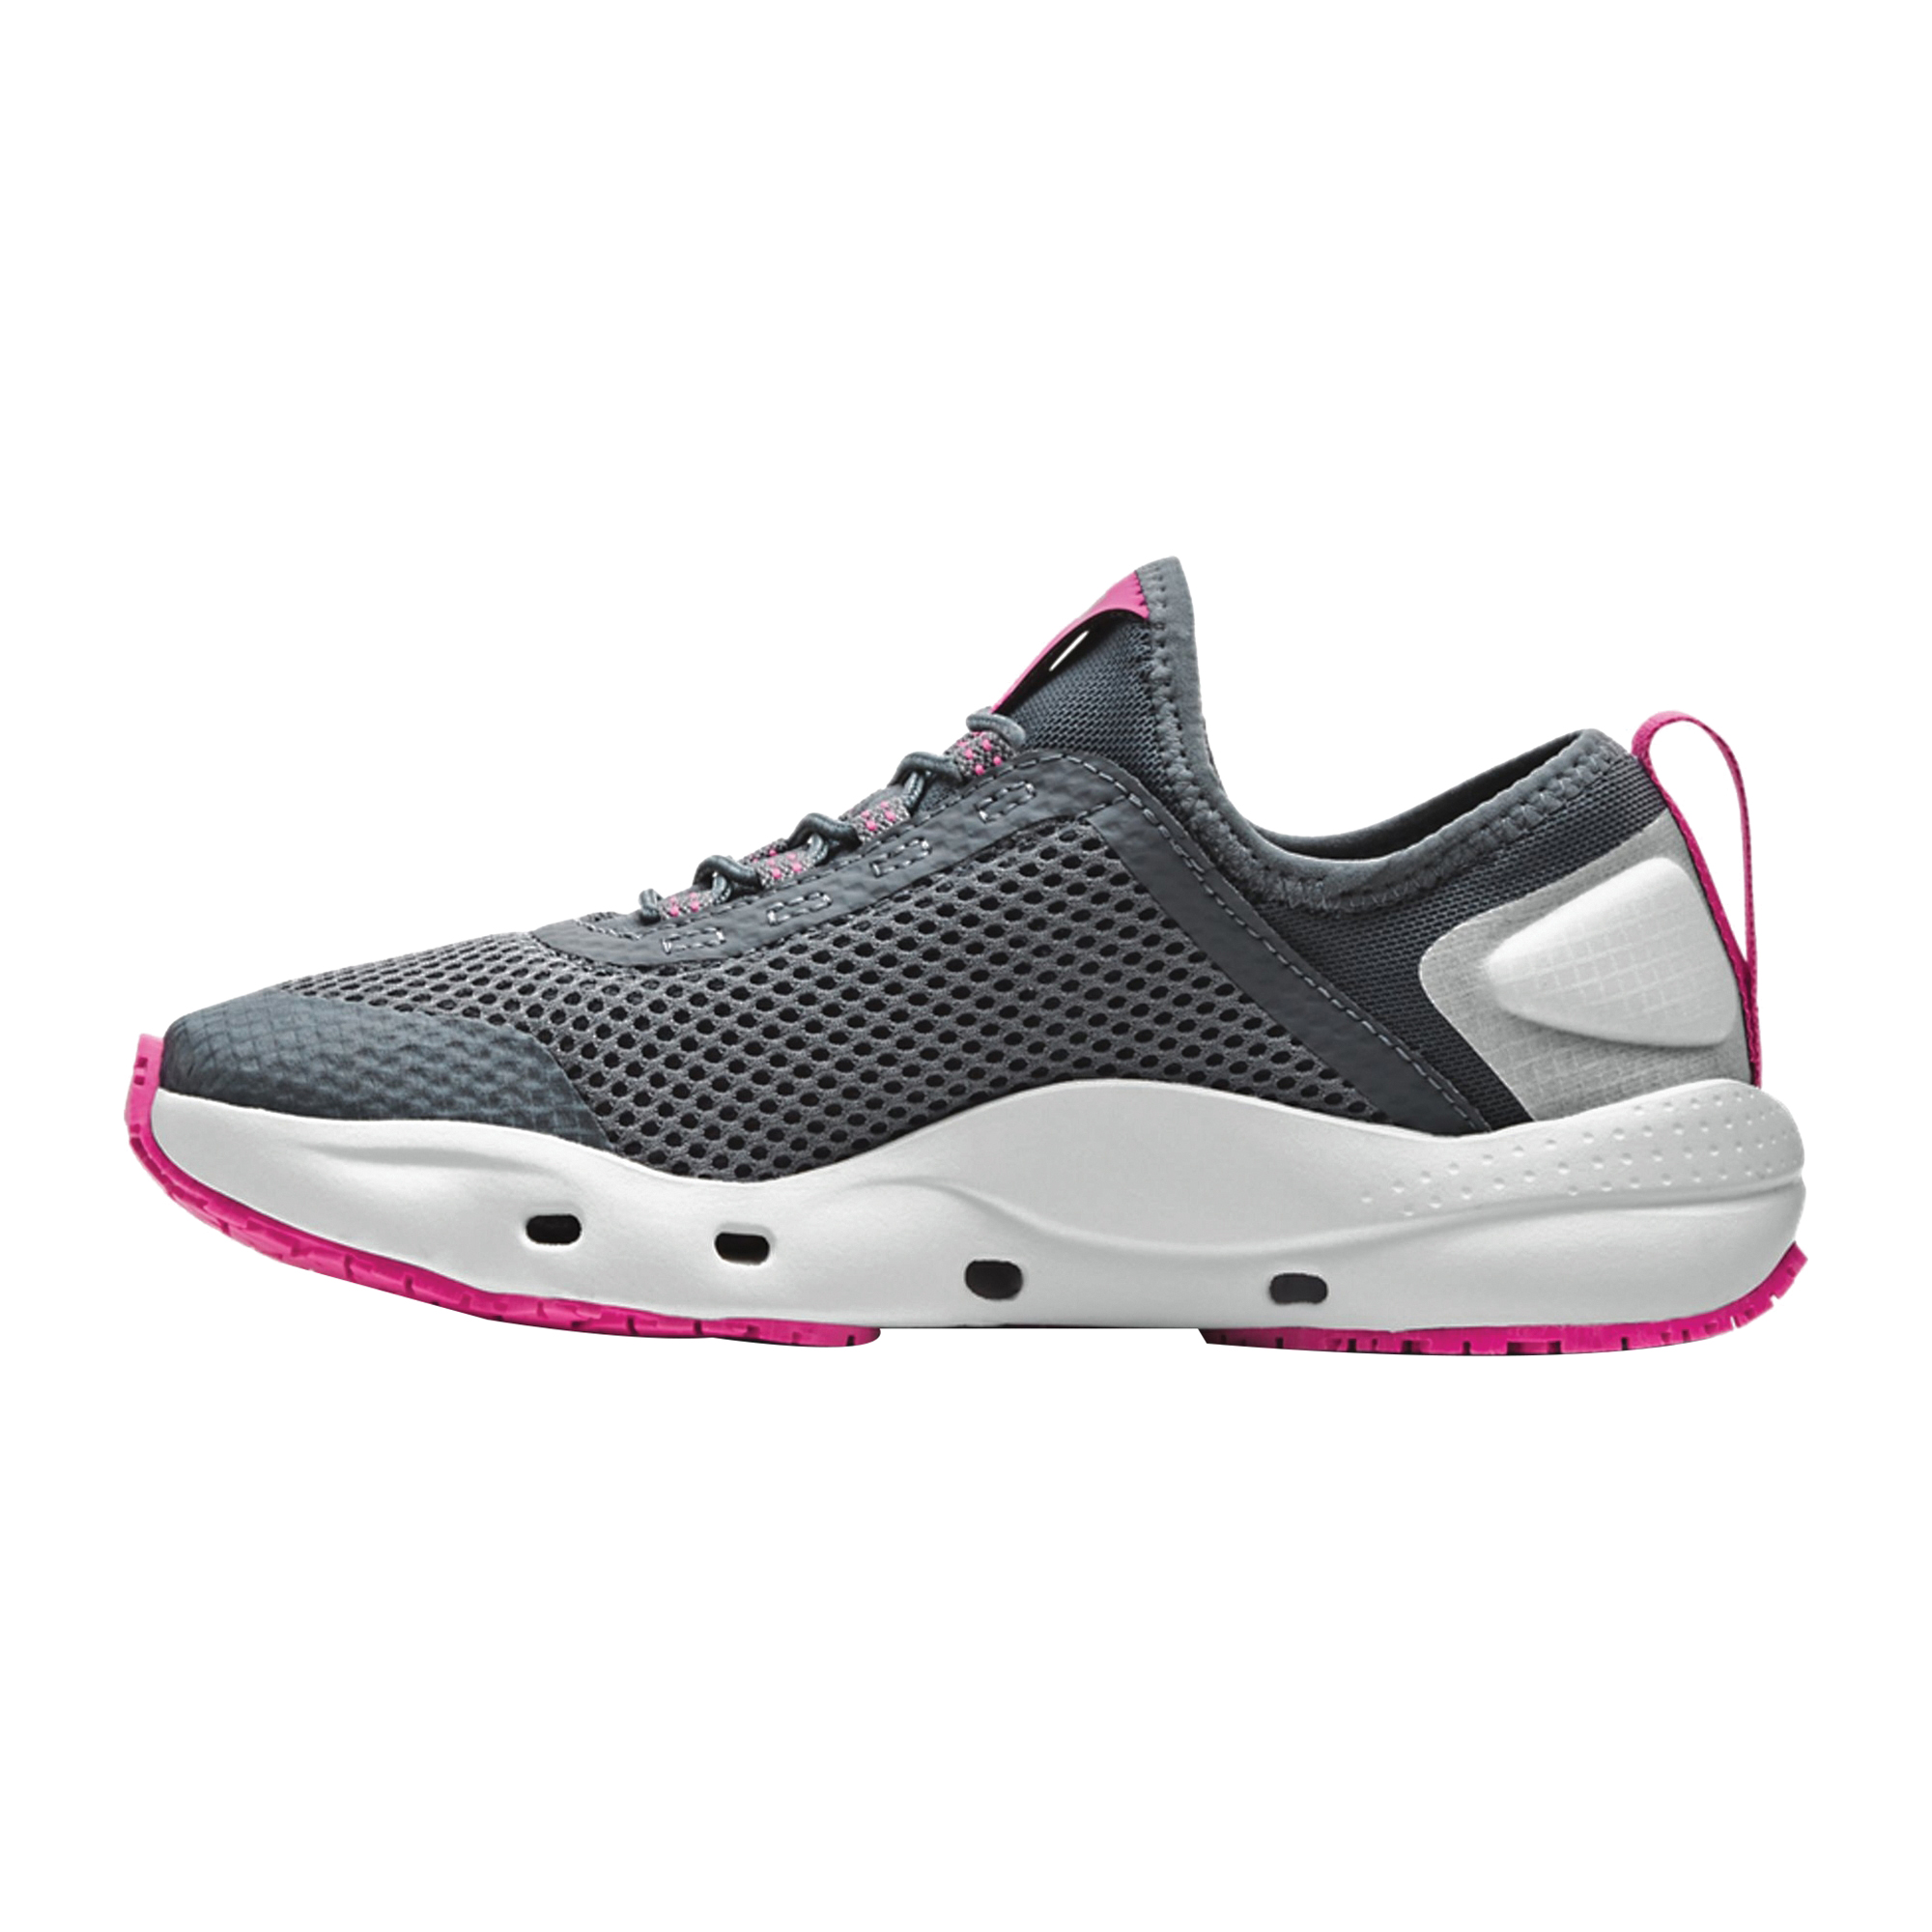 Under Armour Kilchis Series 3023740-103-8 Fishing Shoes, 8, Gravel/Gray Mist, Synthetic Leather, Lace-Up - 2